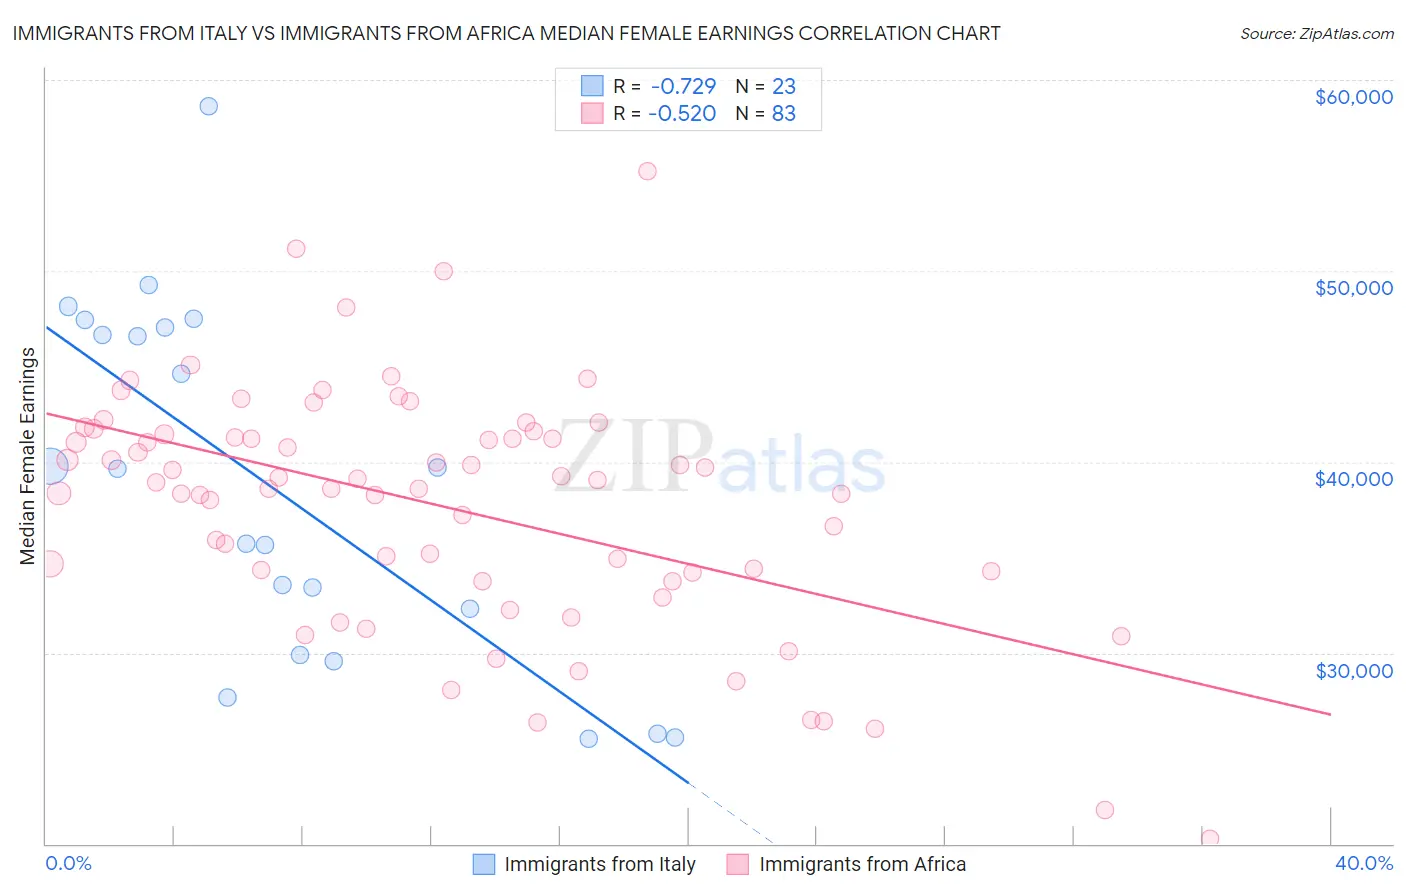 Immigrants from Italy vs Immigrants from Africa Median Female Earnings